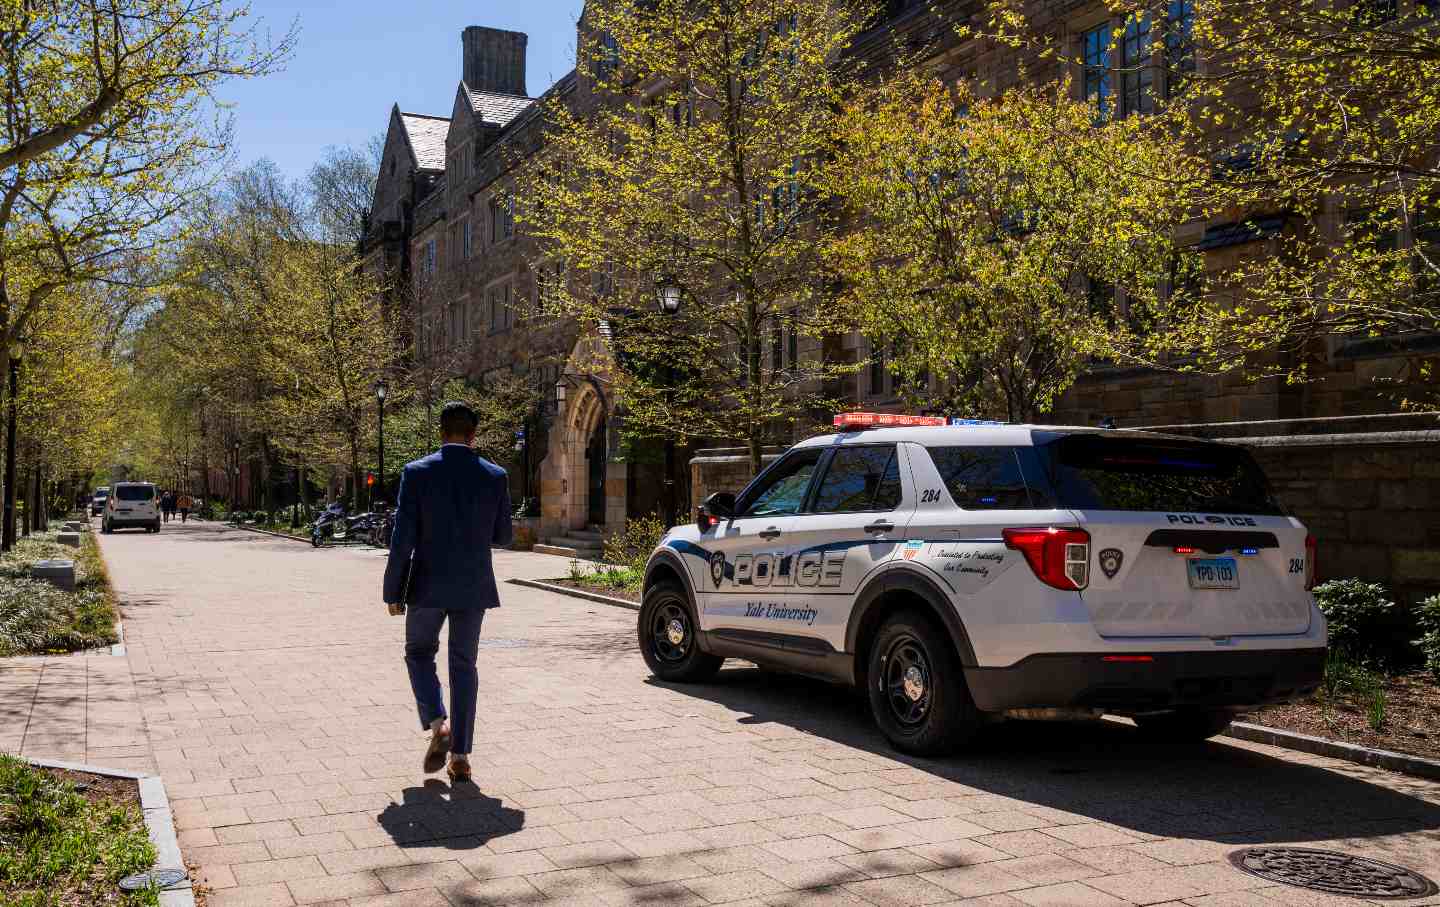 Campus police at Yale University